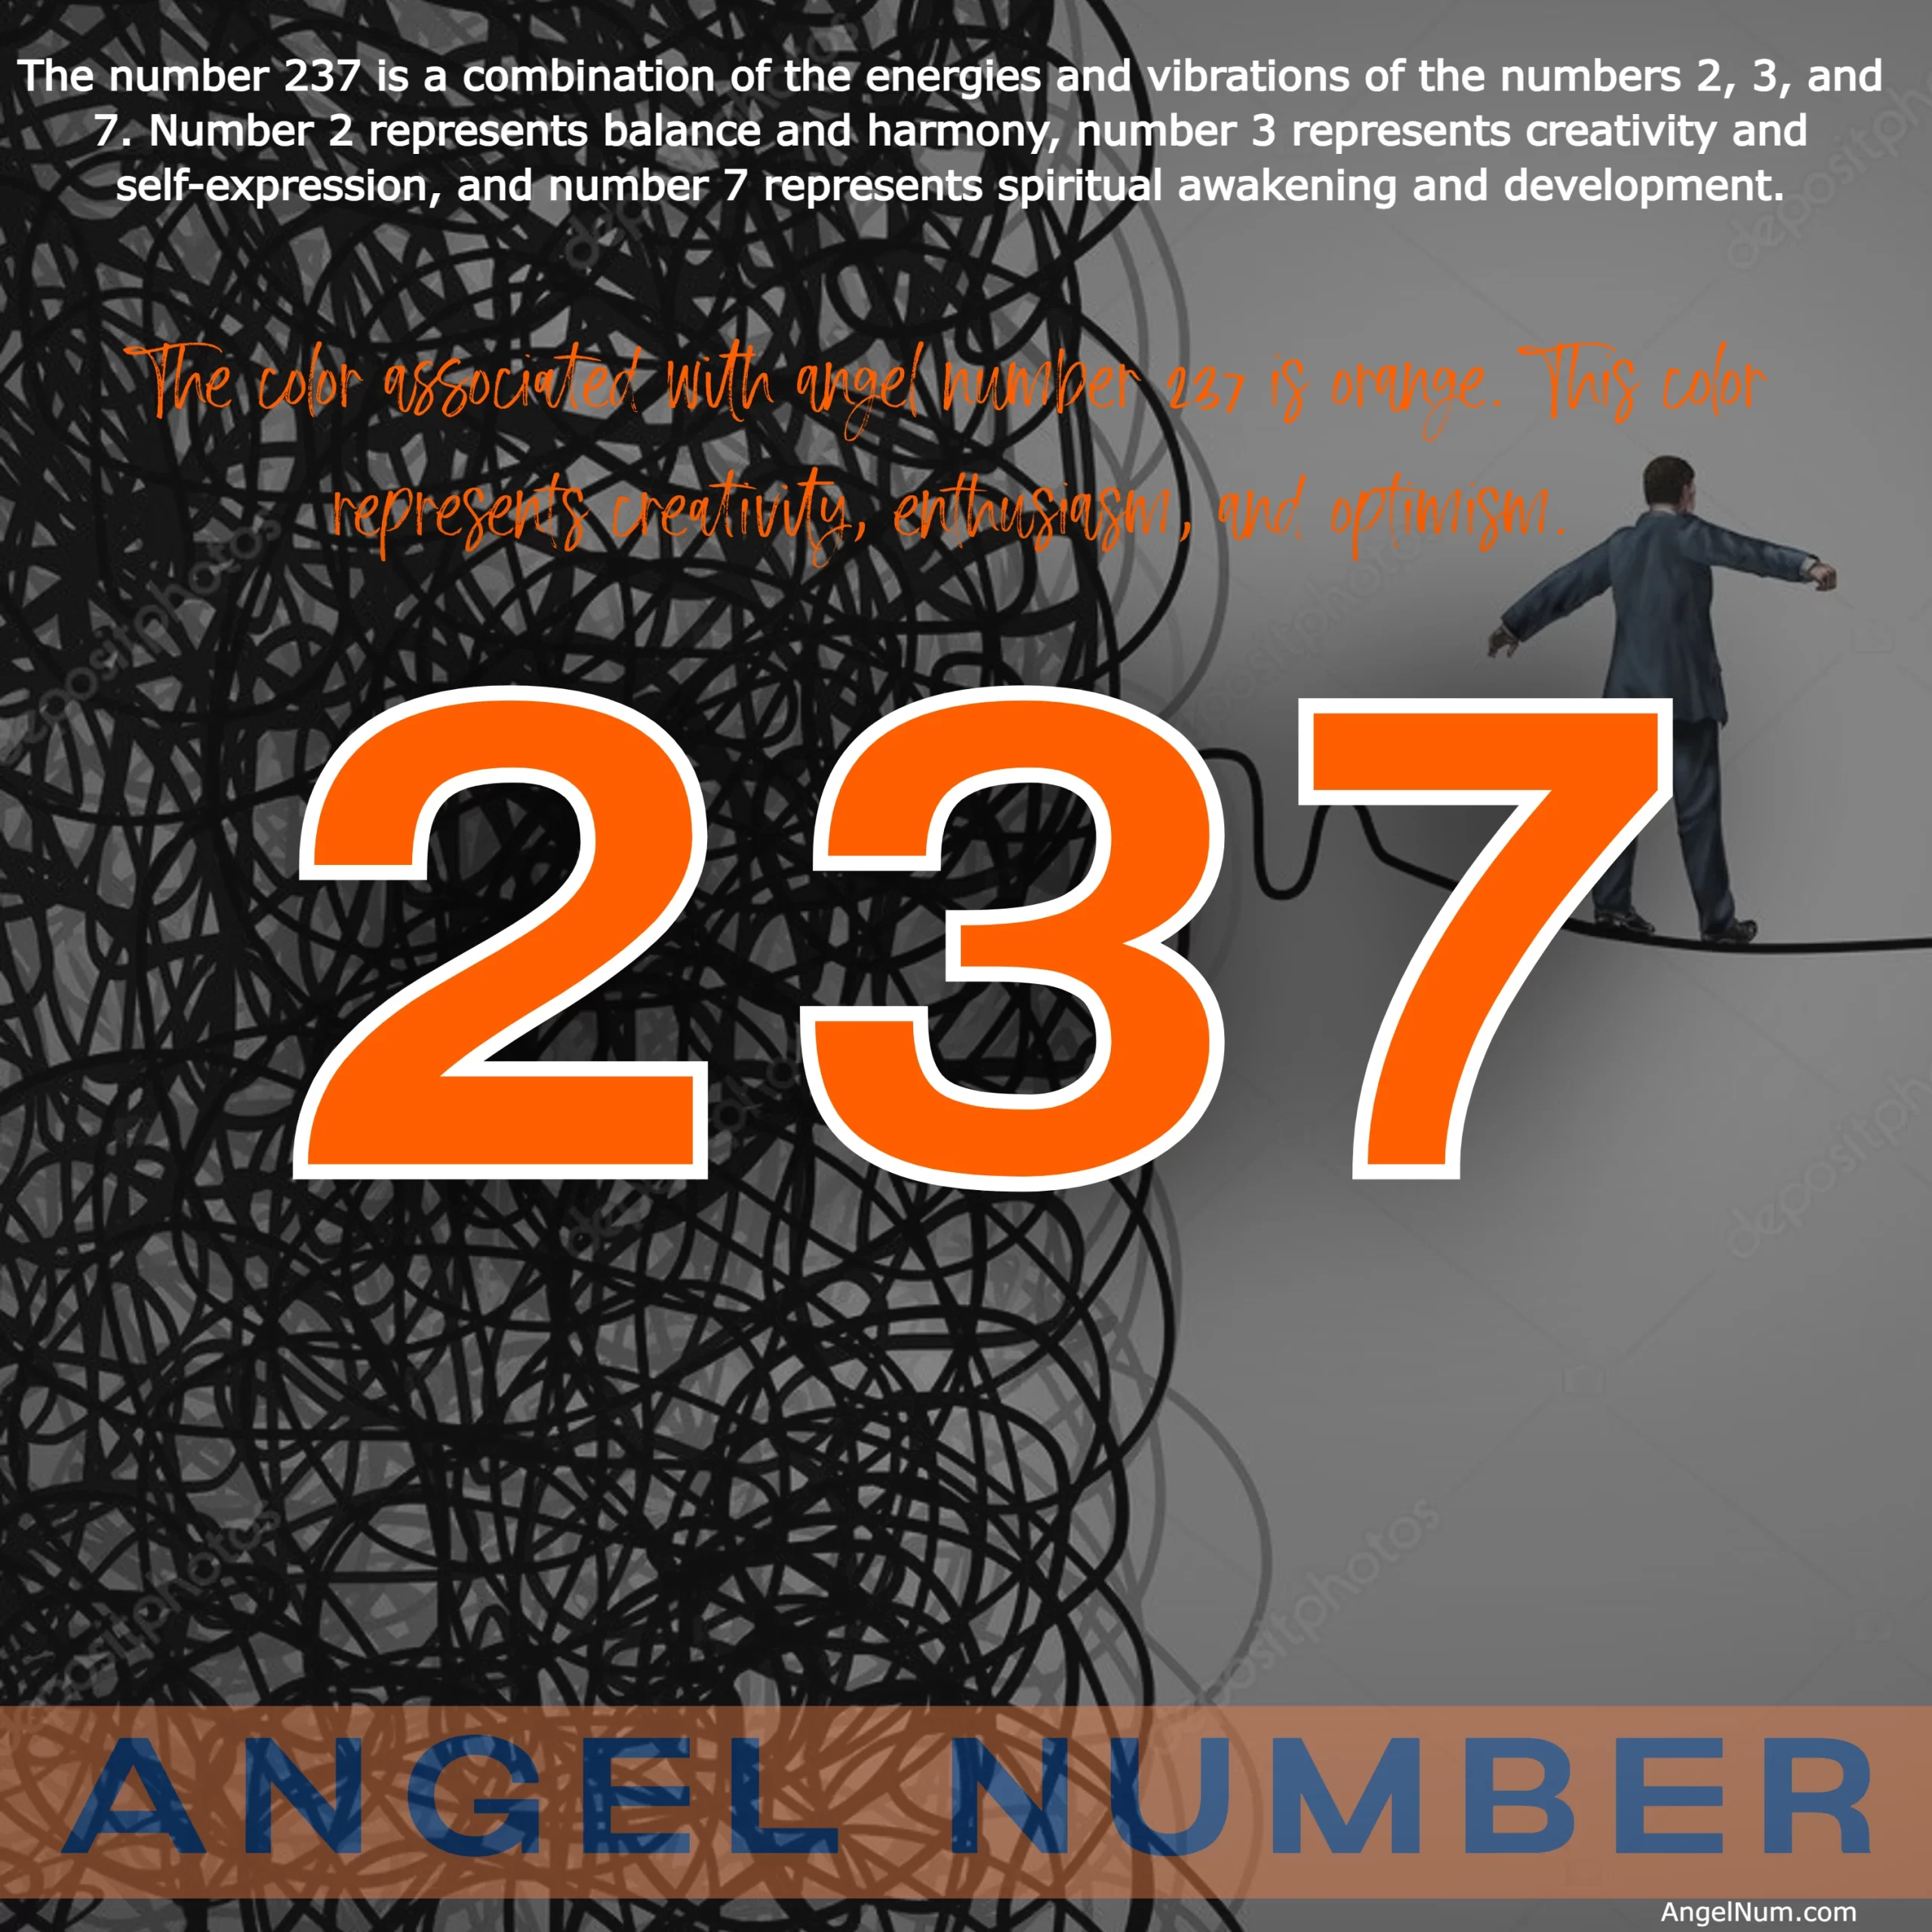 Angel Number 237: Meaning, Symbolism, and Significance